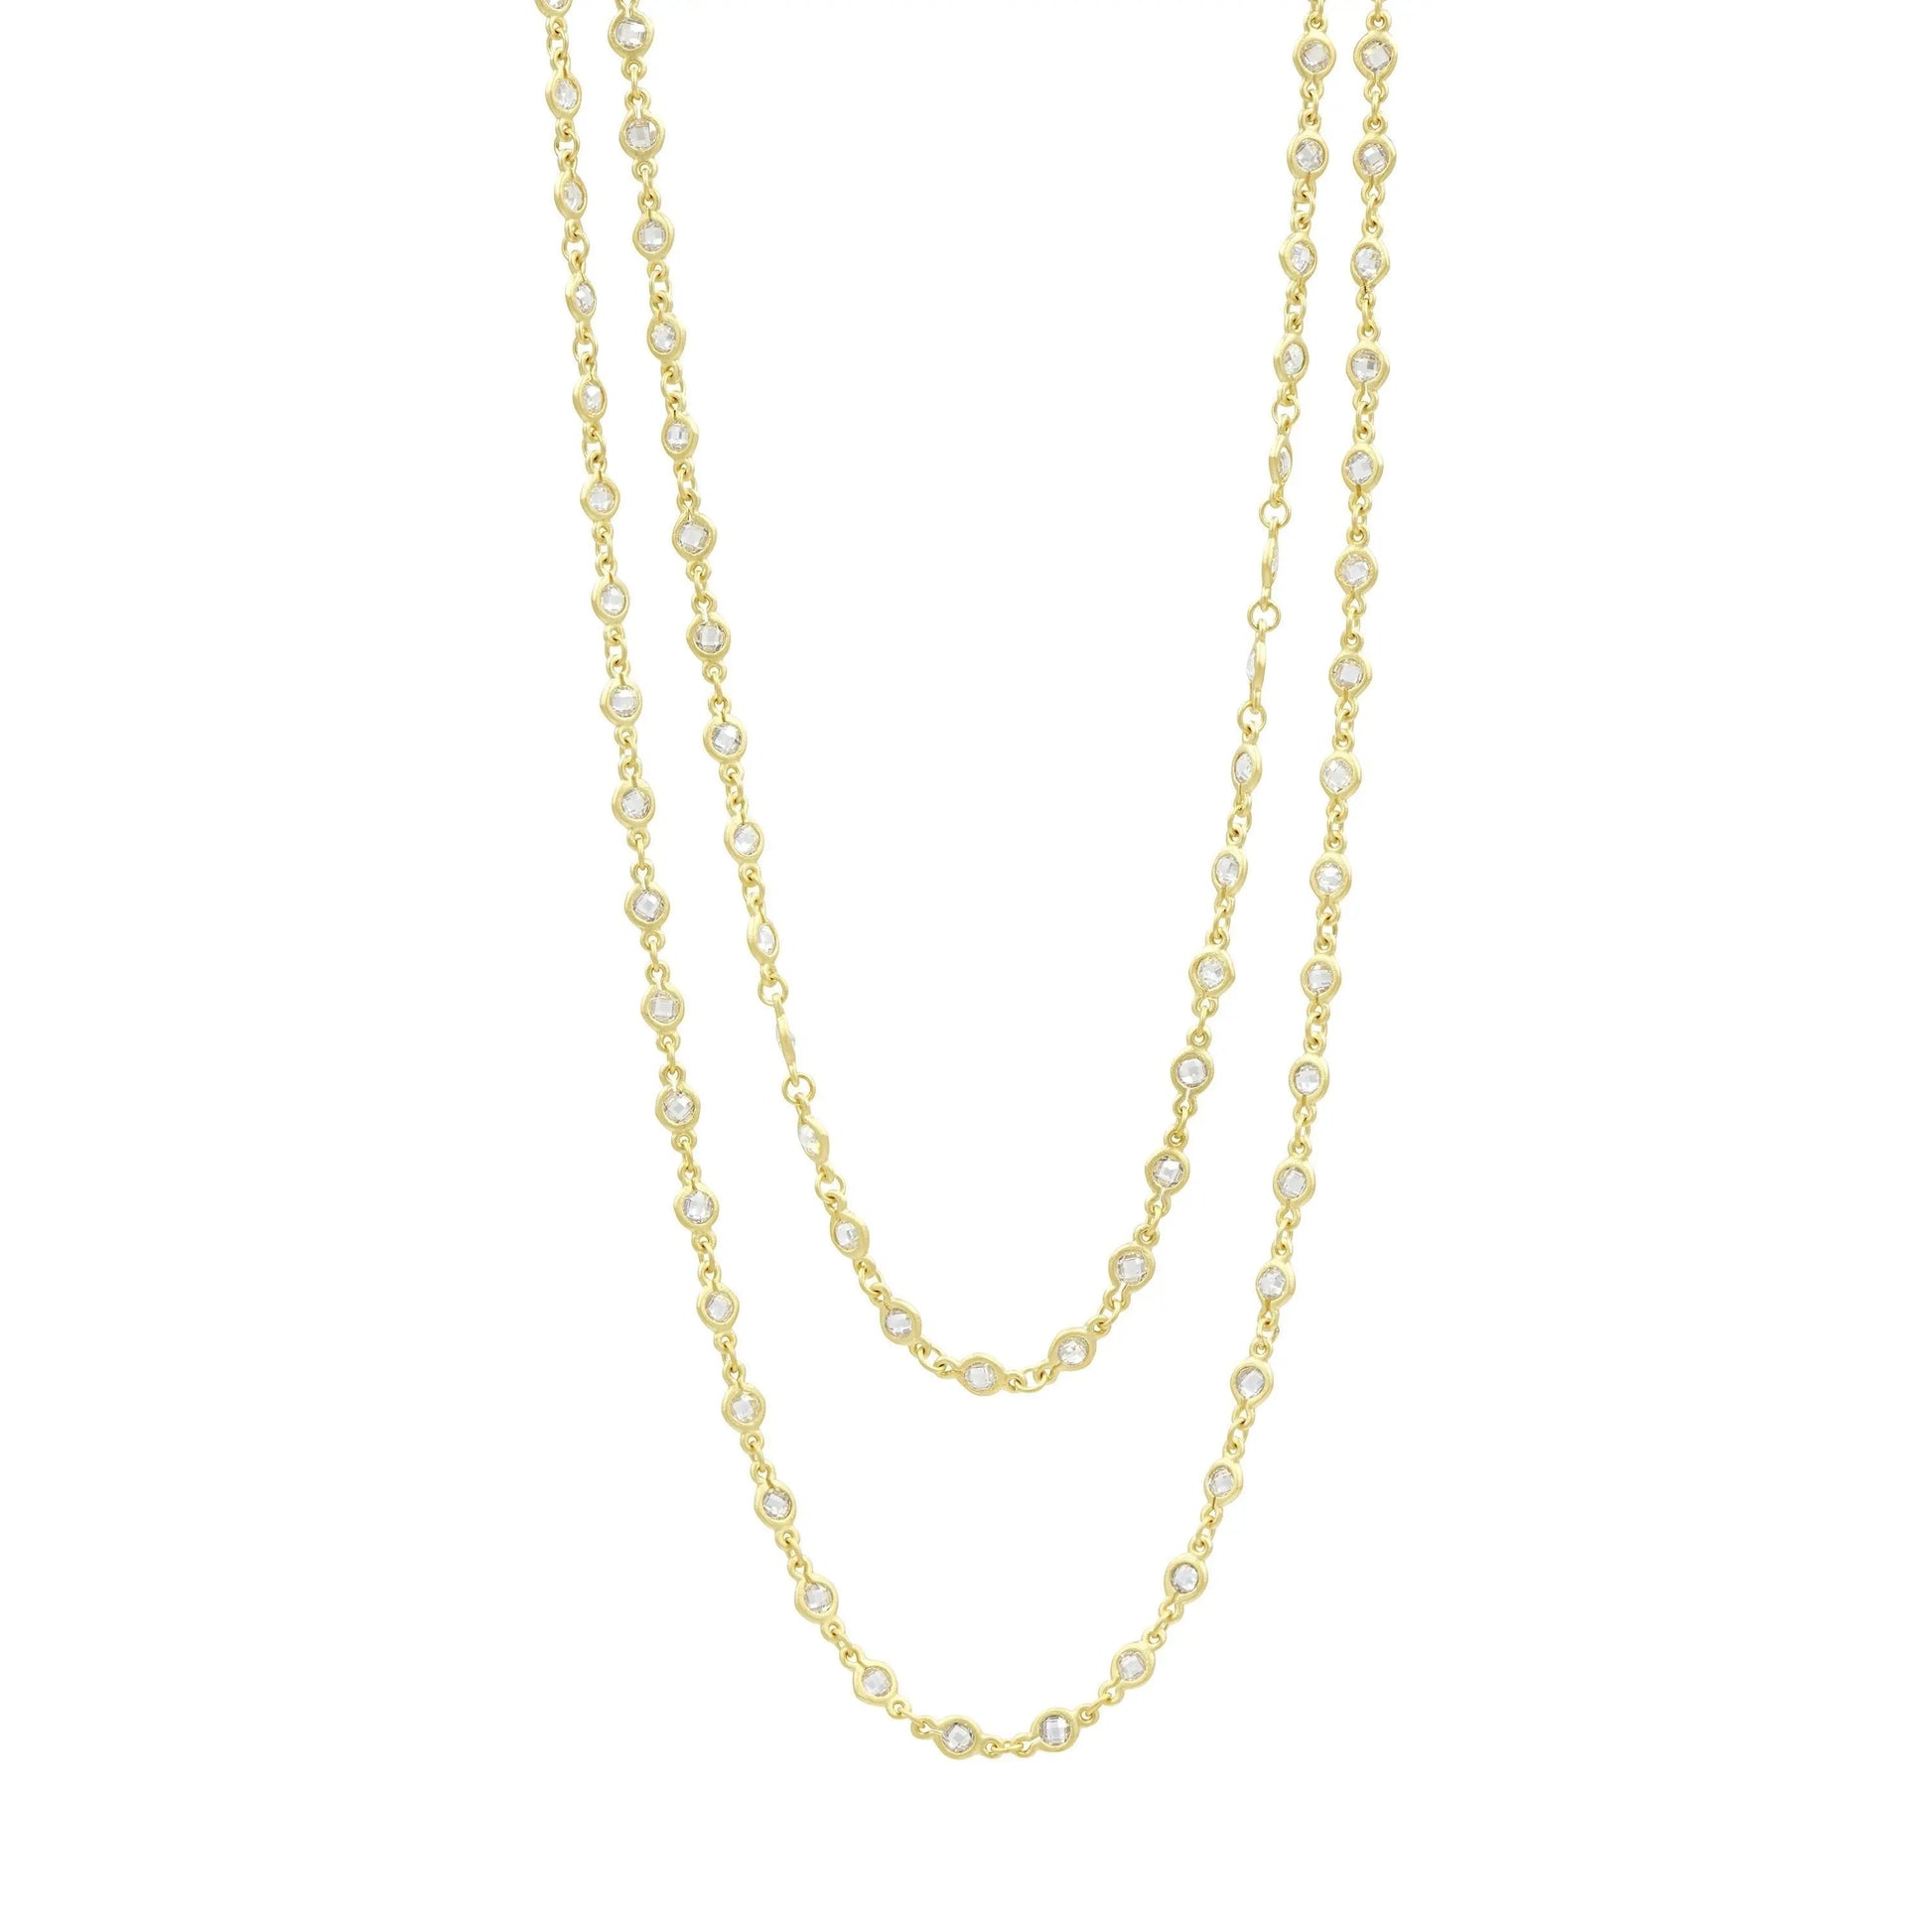 Gold Faceted Stones Wrap Chain Necklace Signature NECKLACE